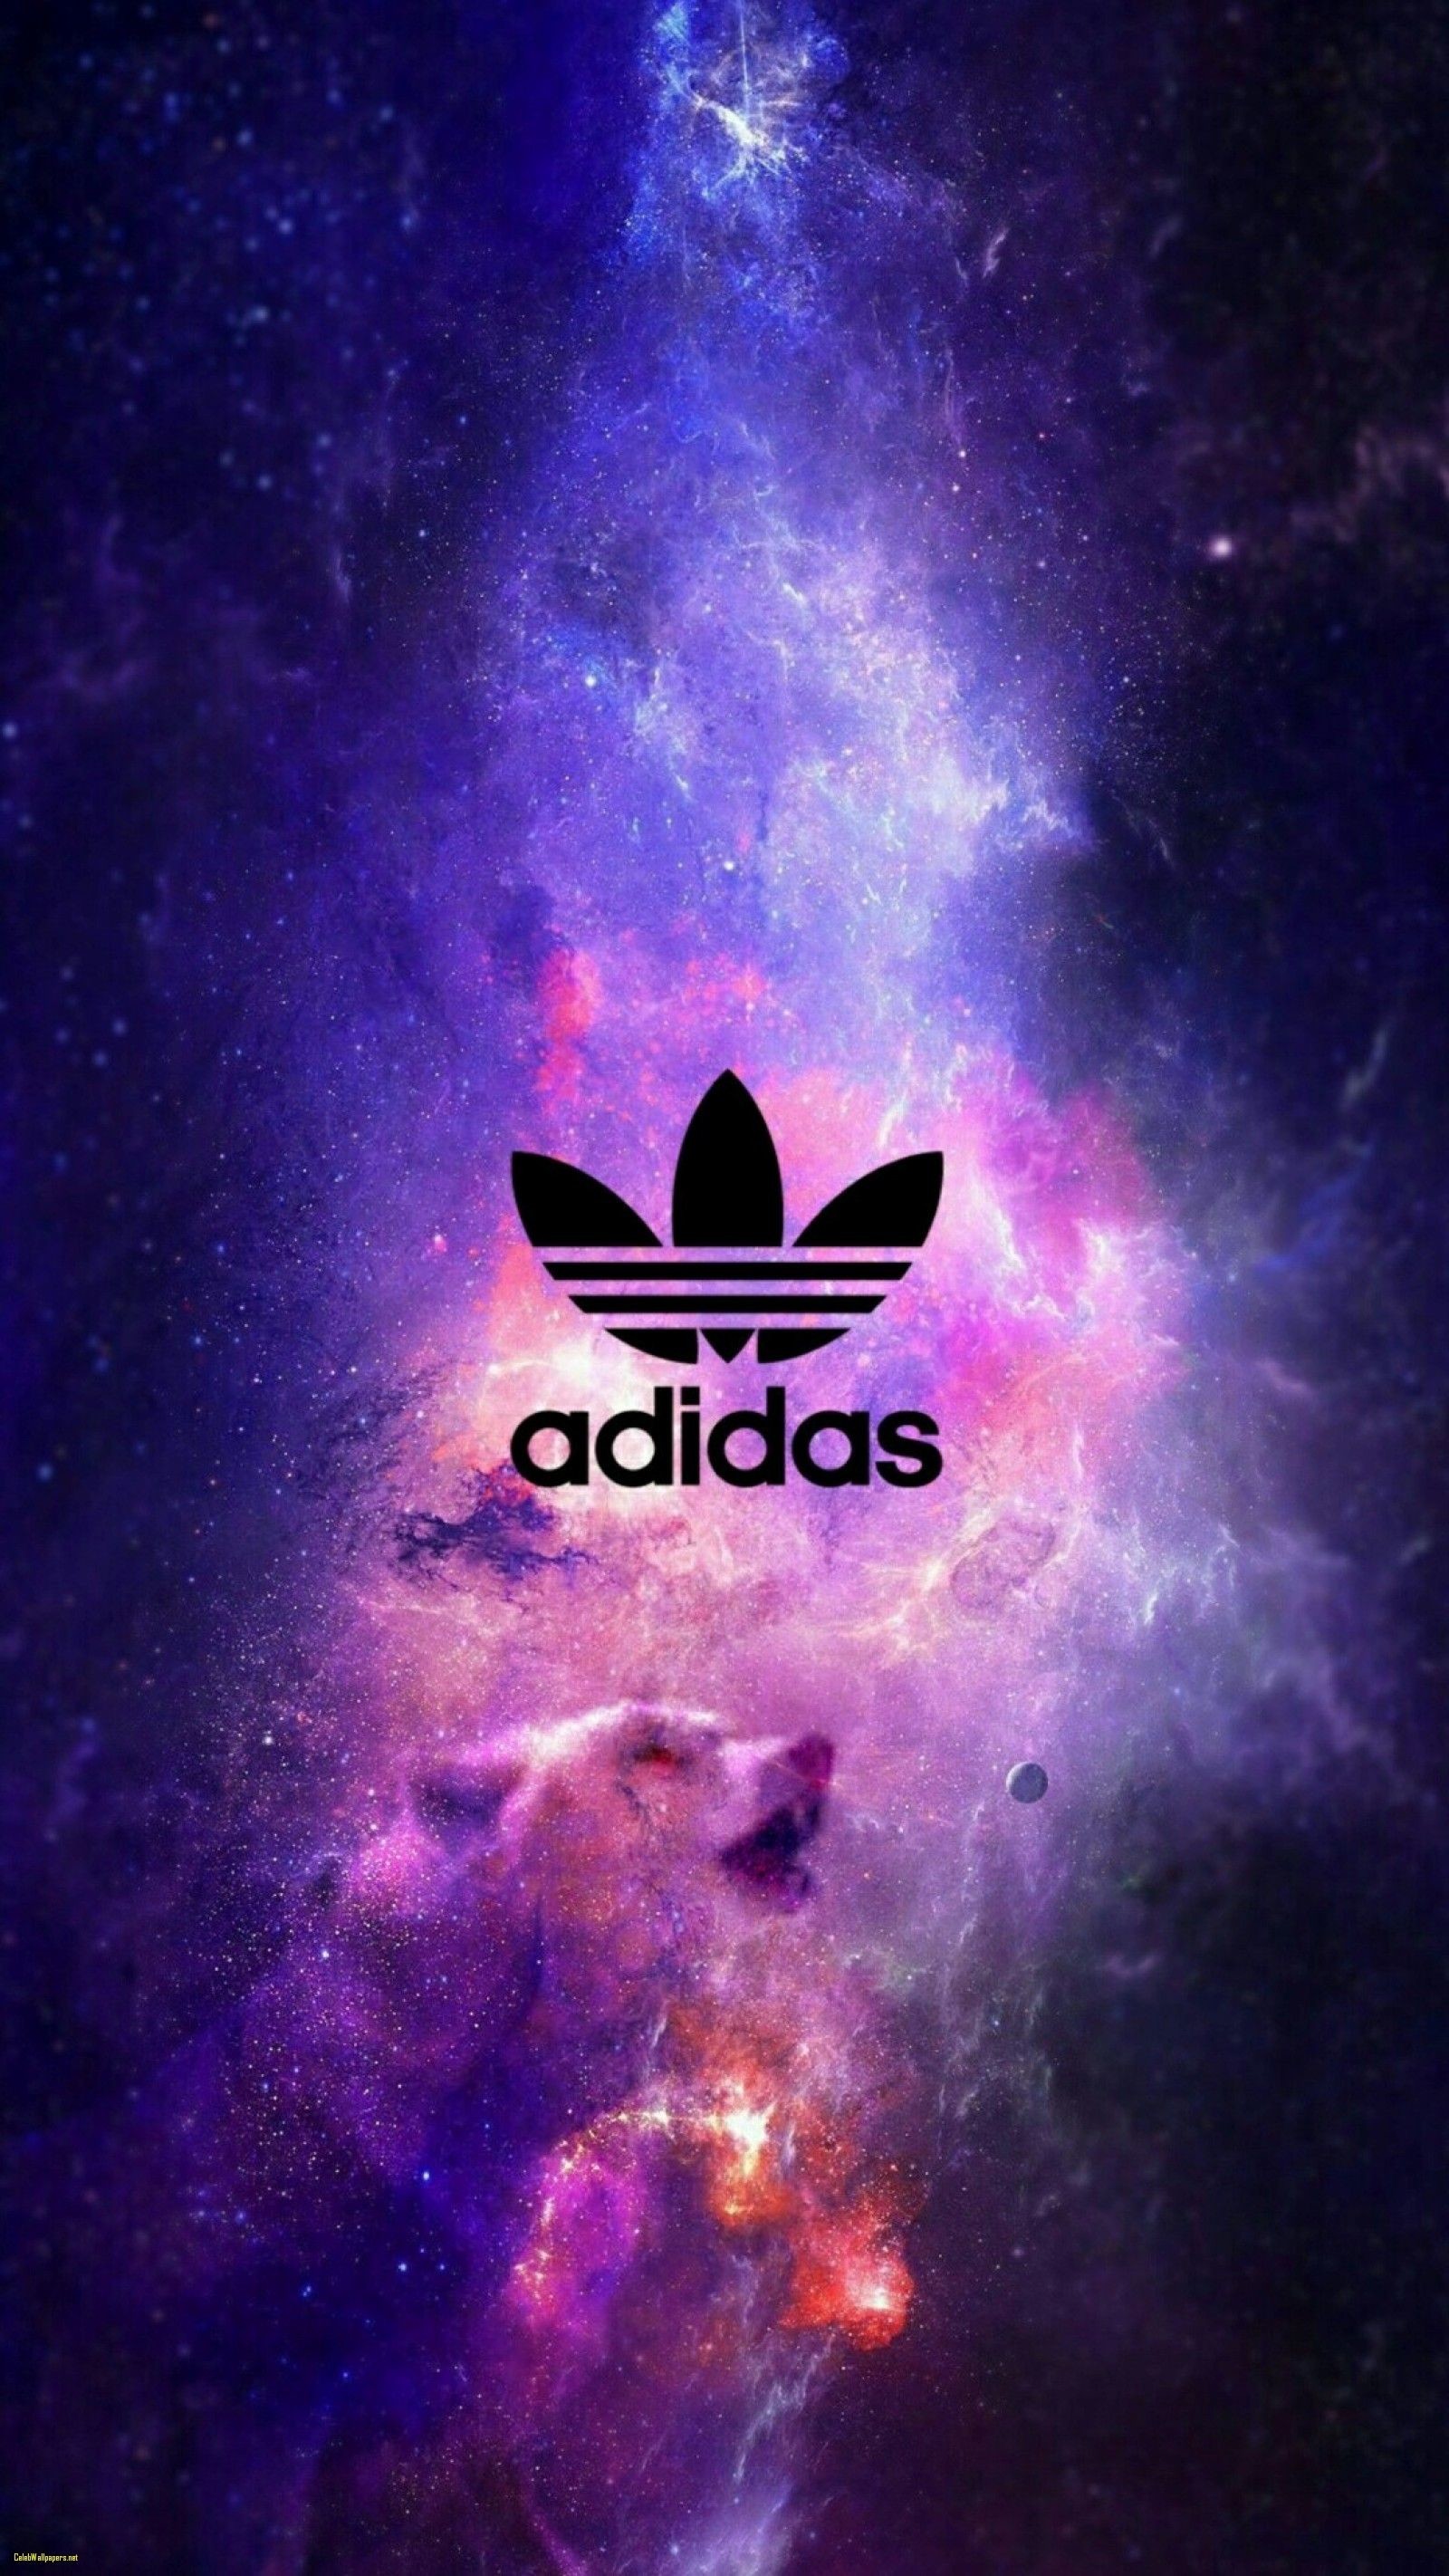 1600x2844 1920x1080 adidas backgrounds Group with 77 items">